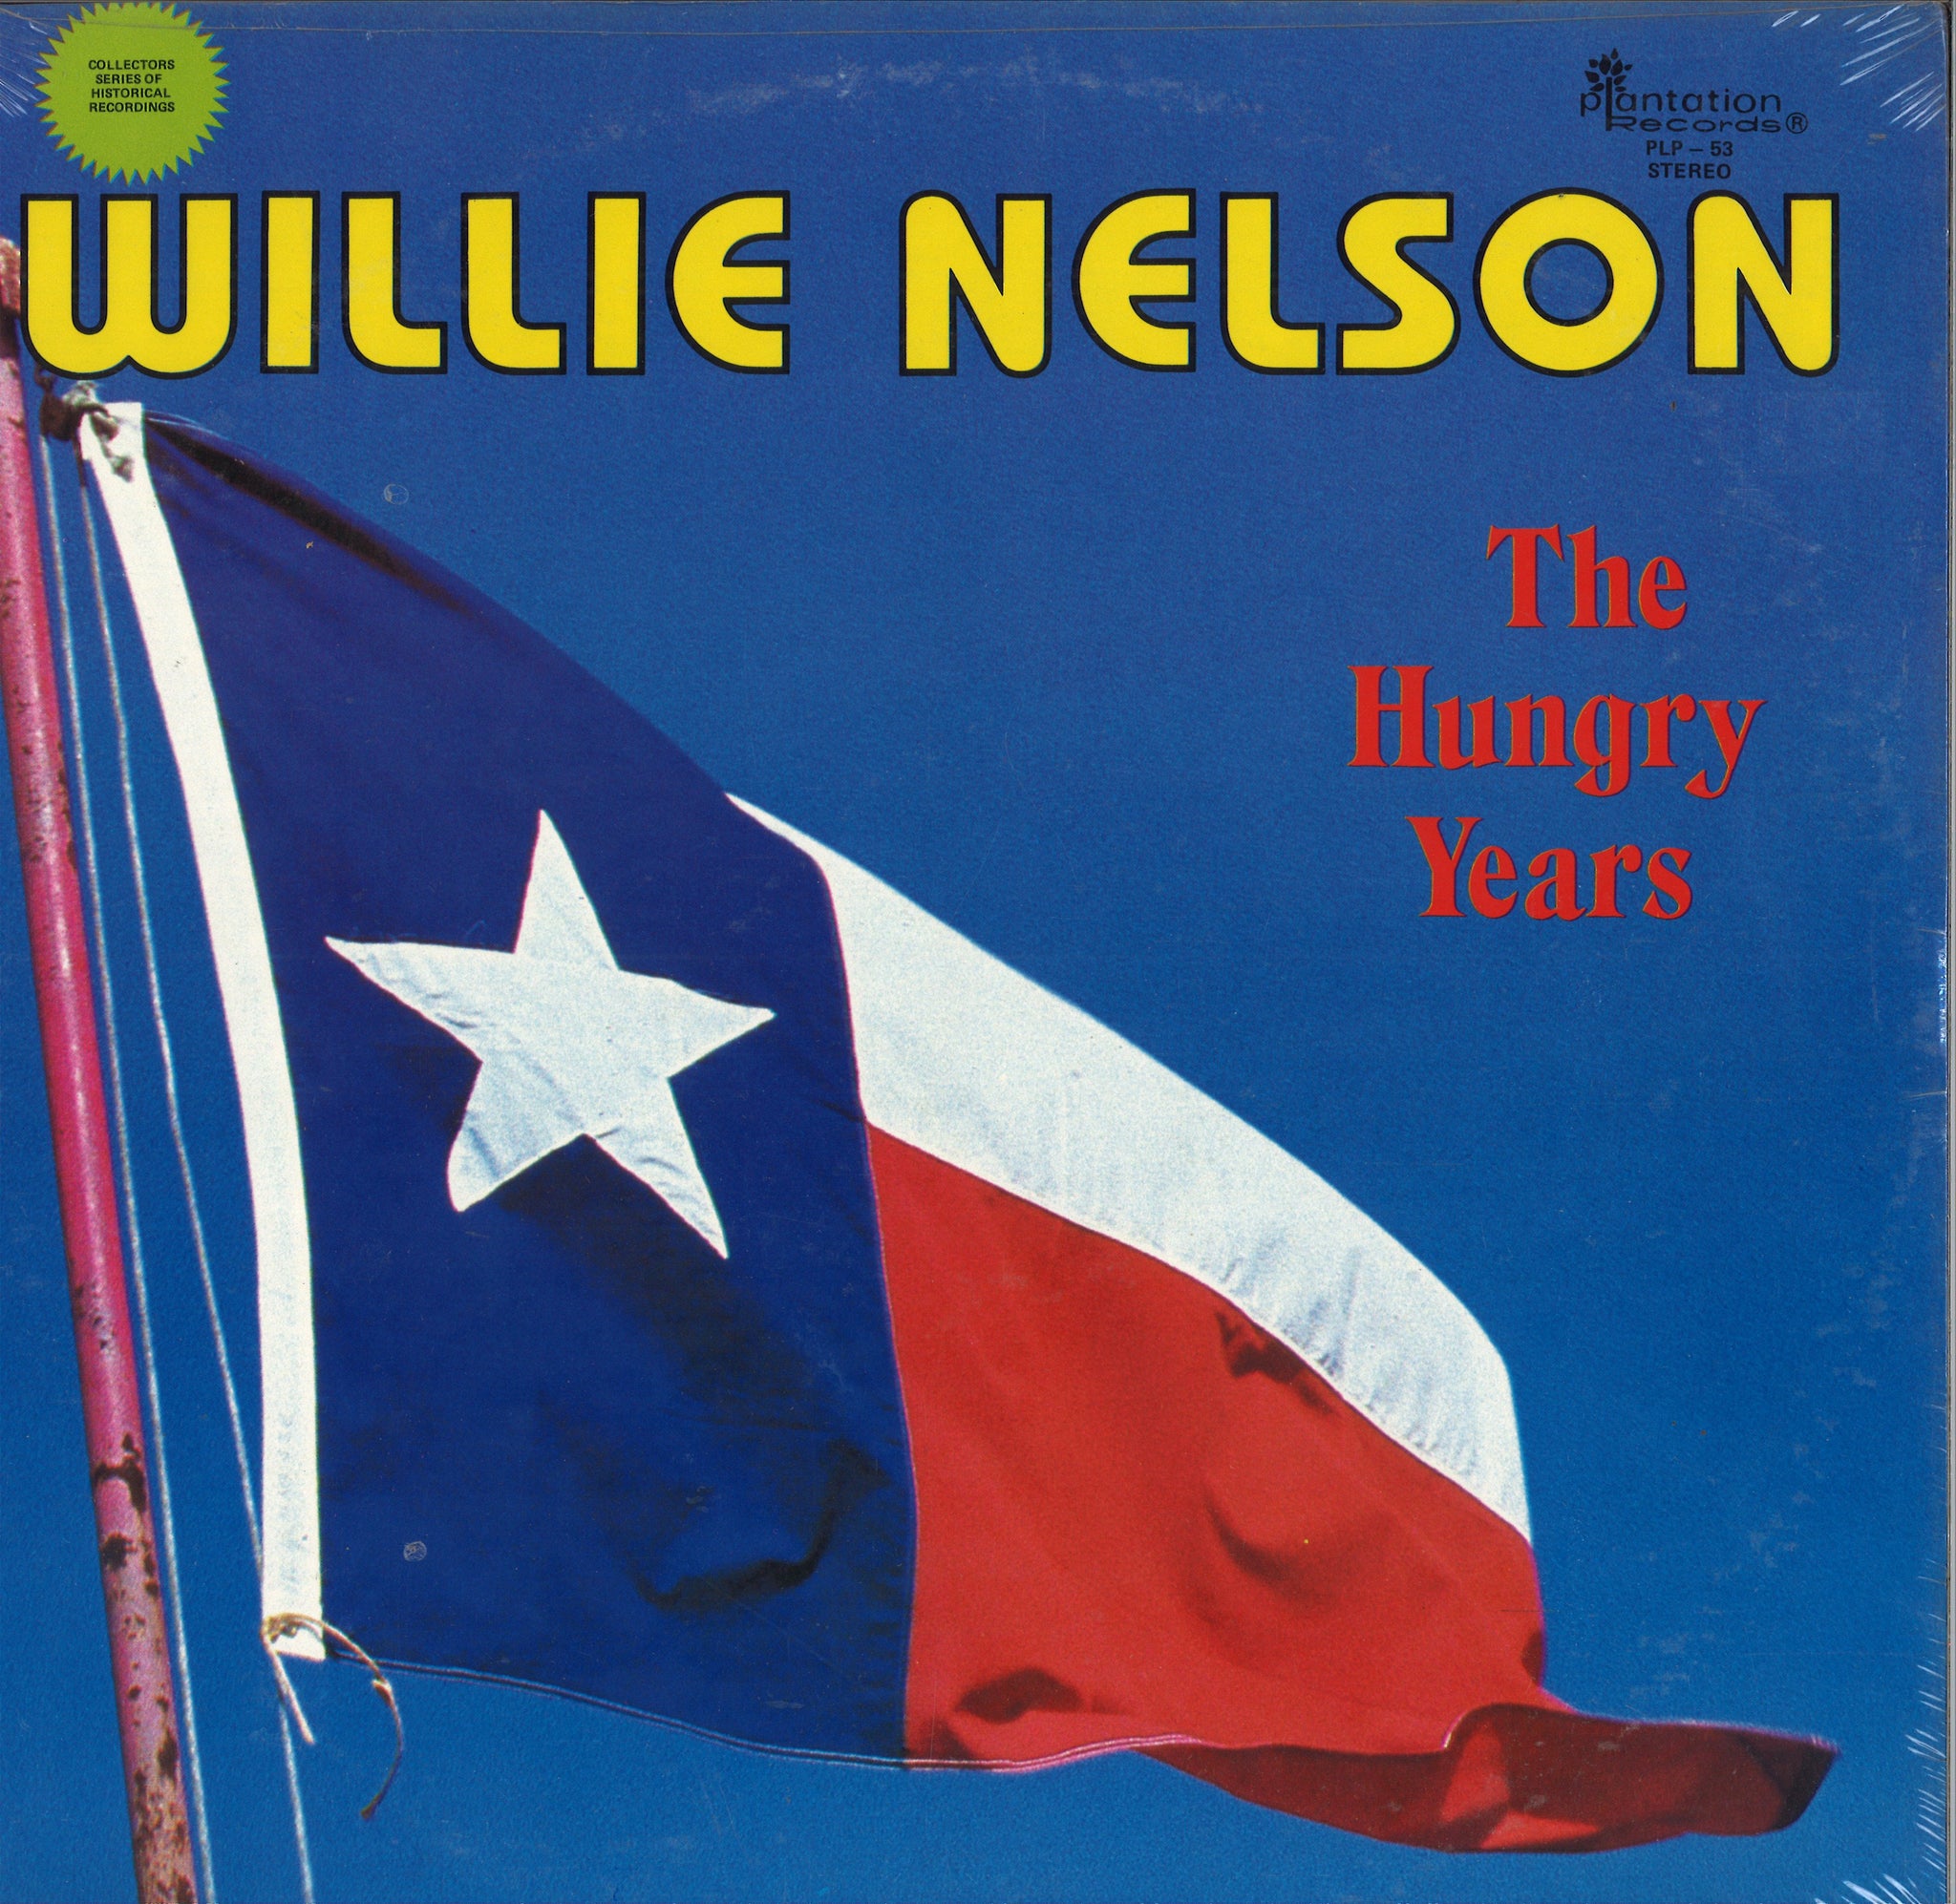 Willie Nelson The Hungry Years